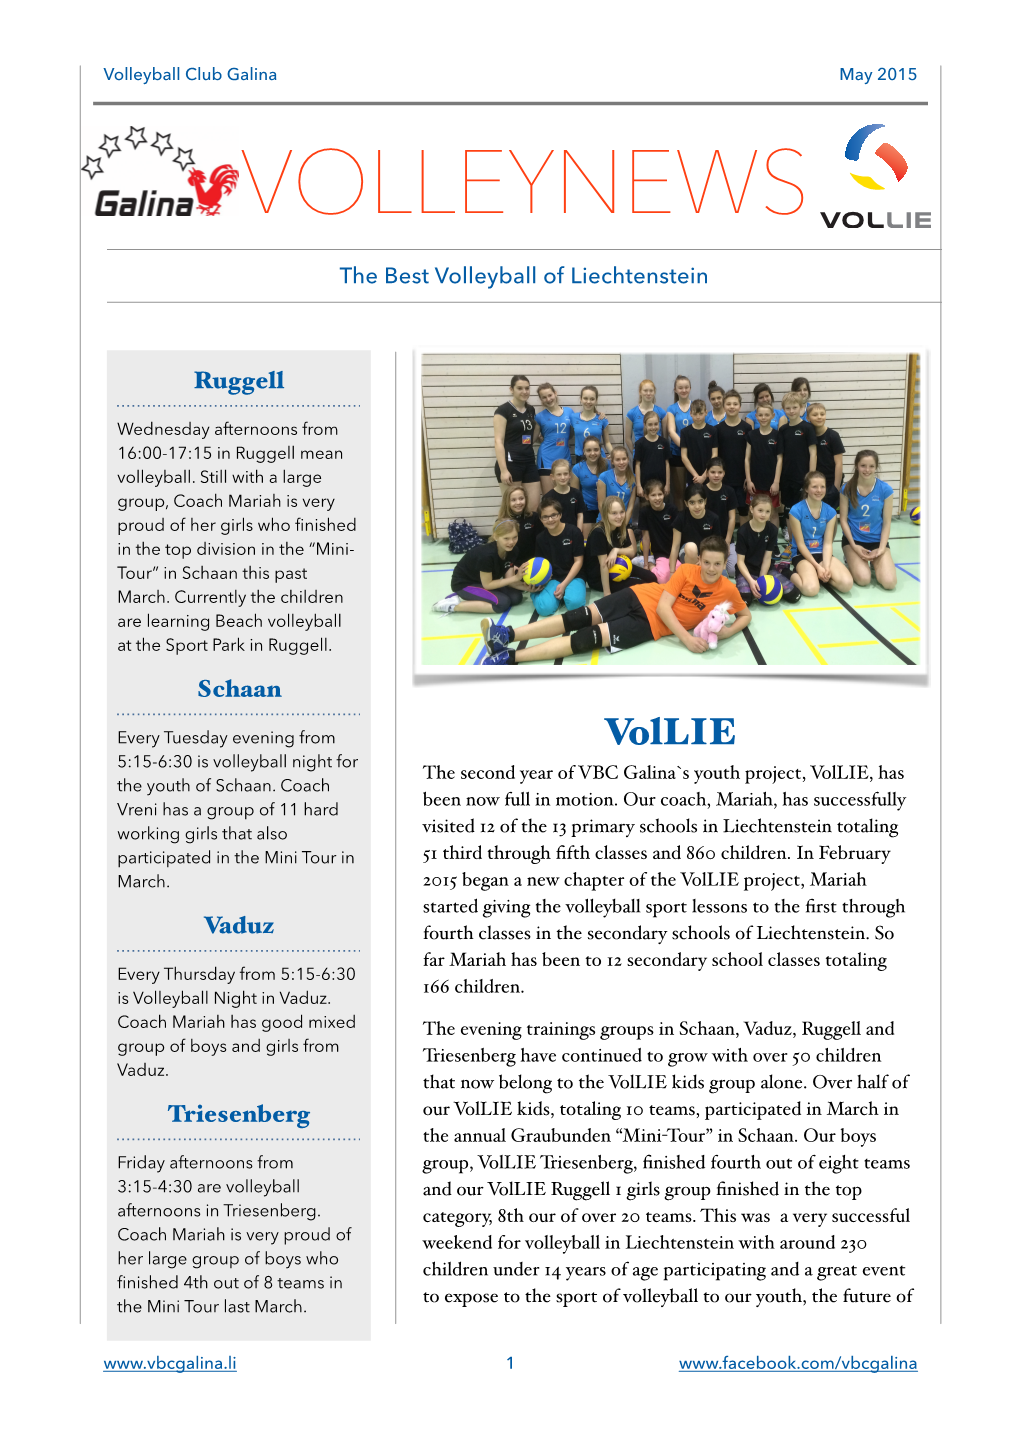 Vollie/VBS May 2015